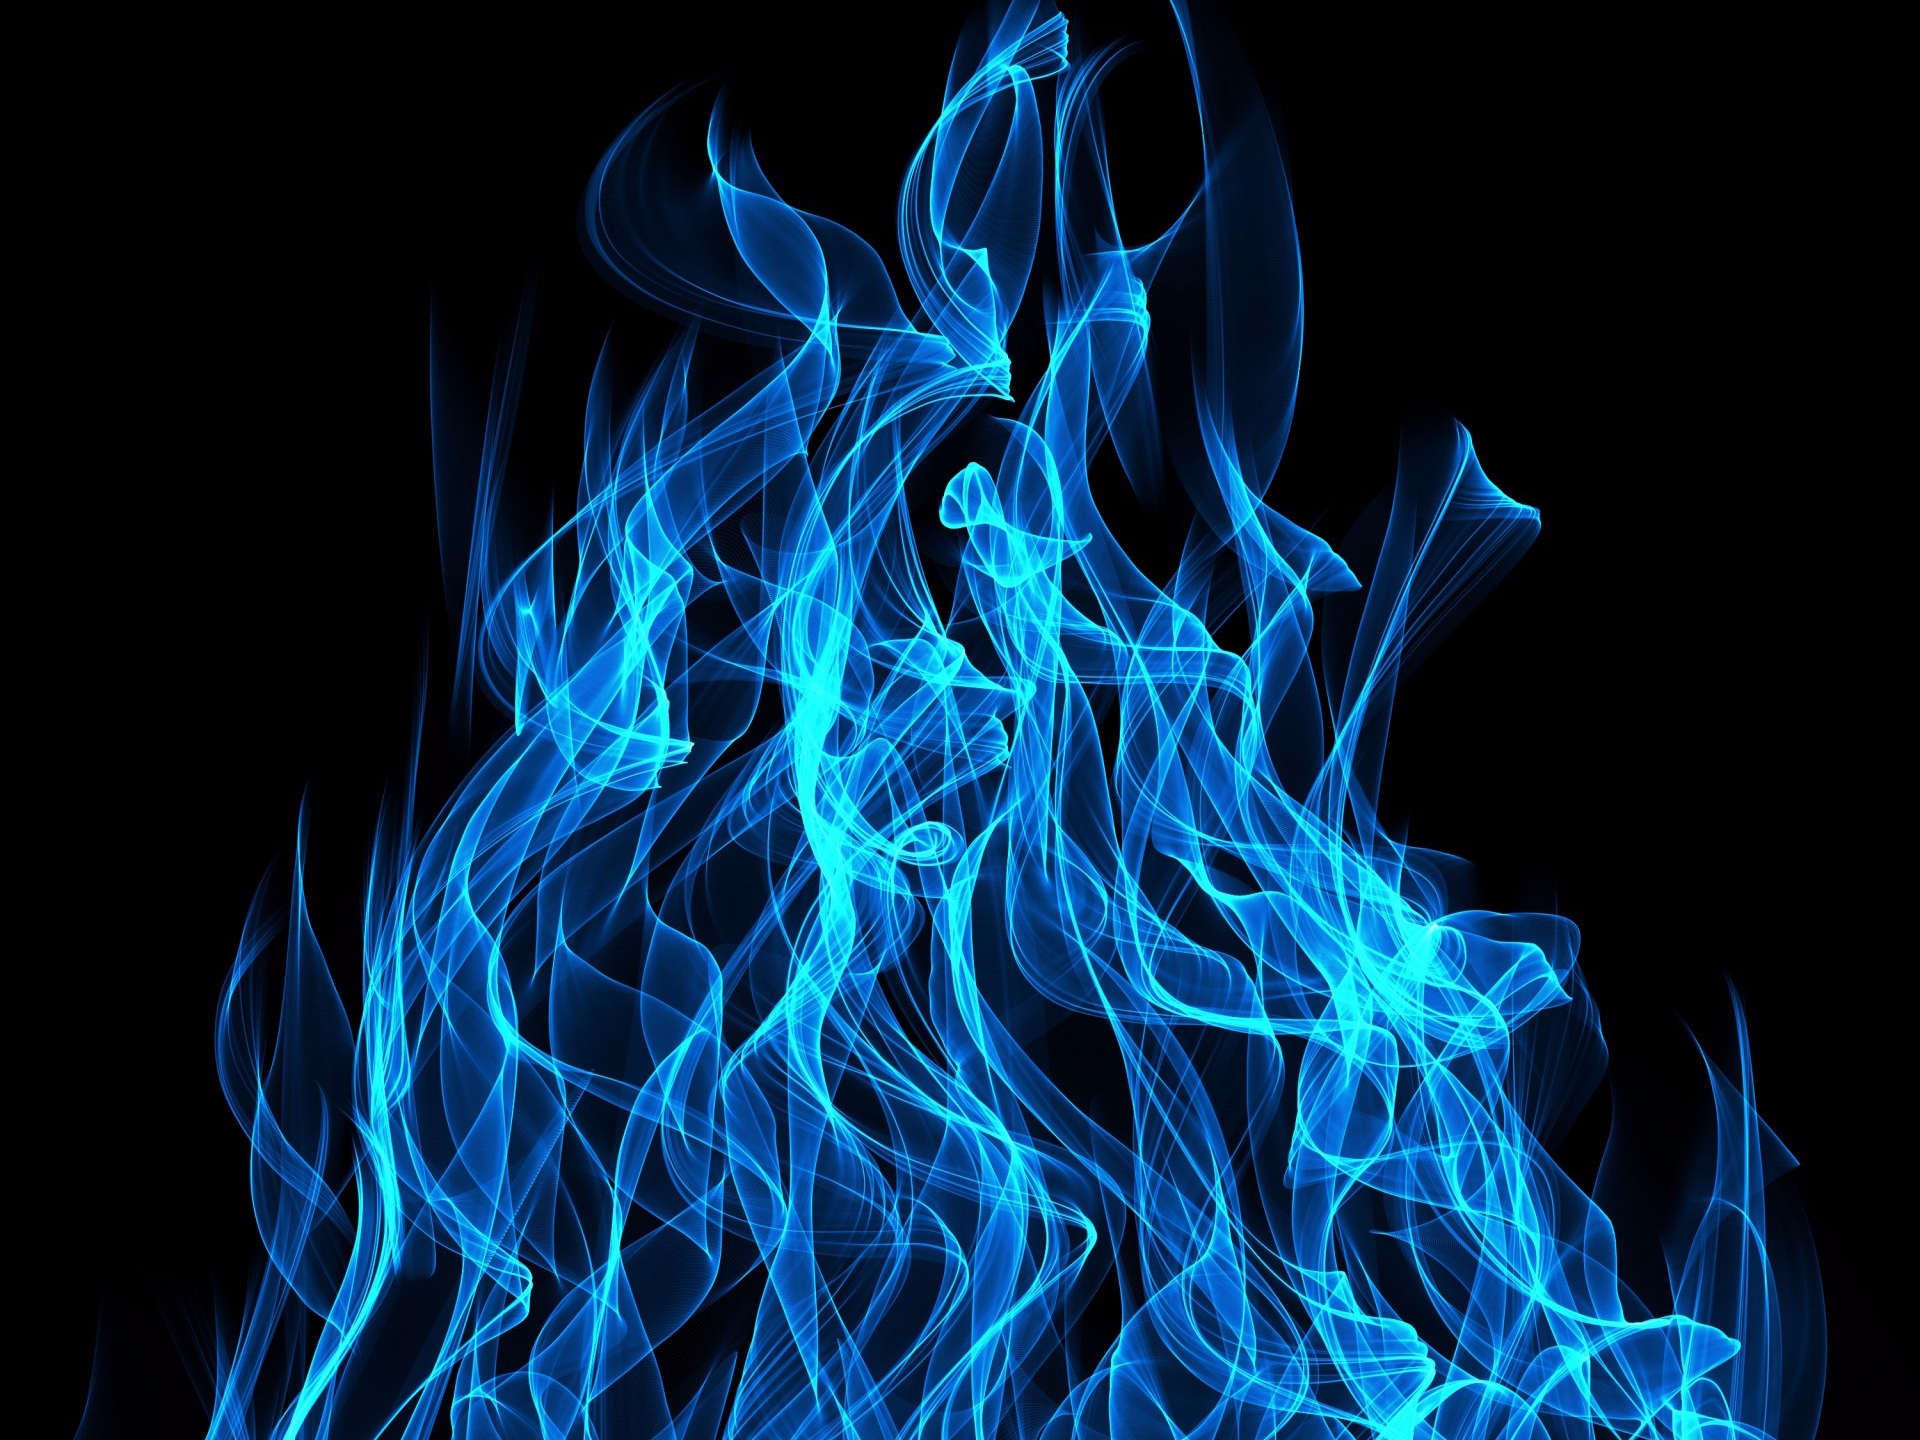 What VCs mean by the term 'blue flame' - Business Insider